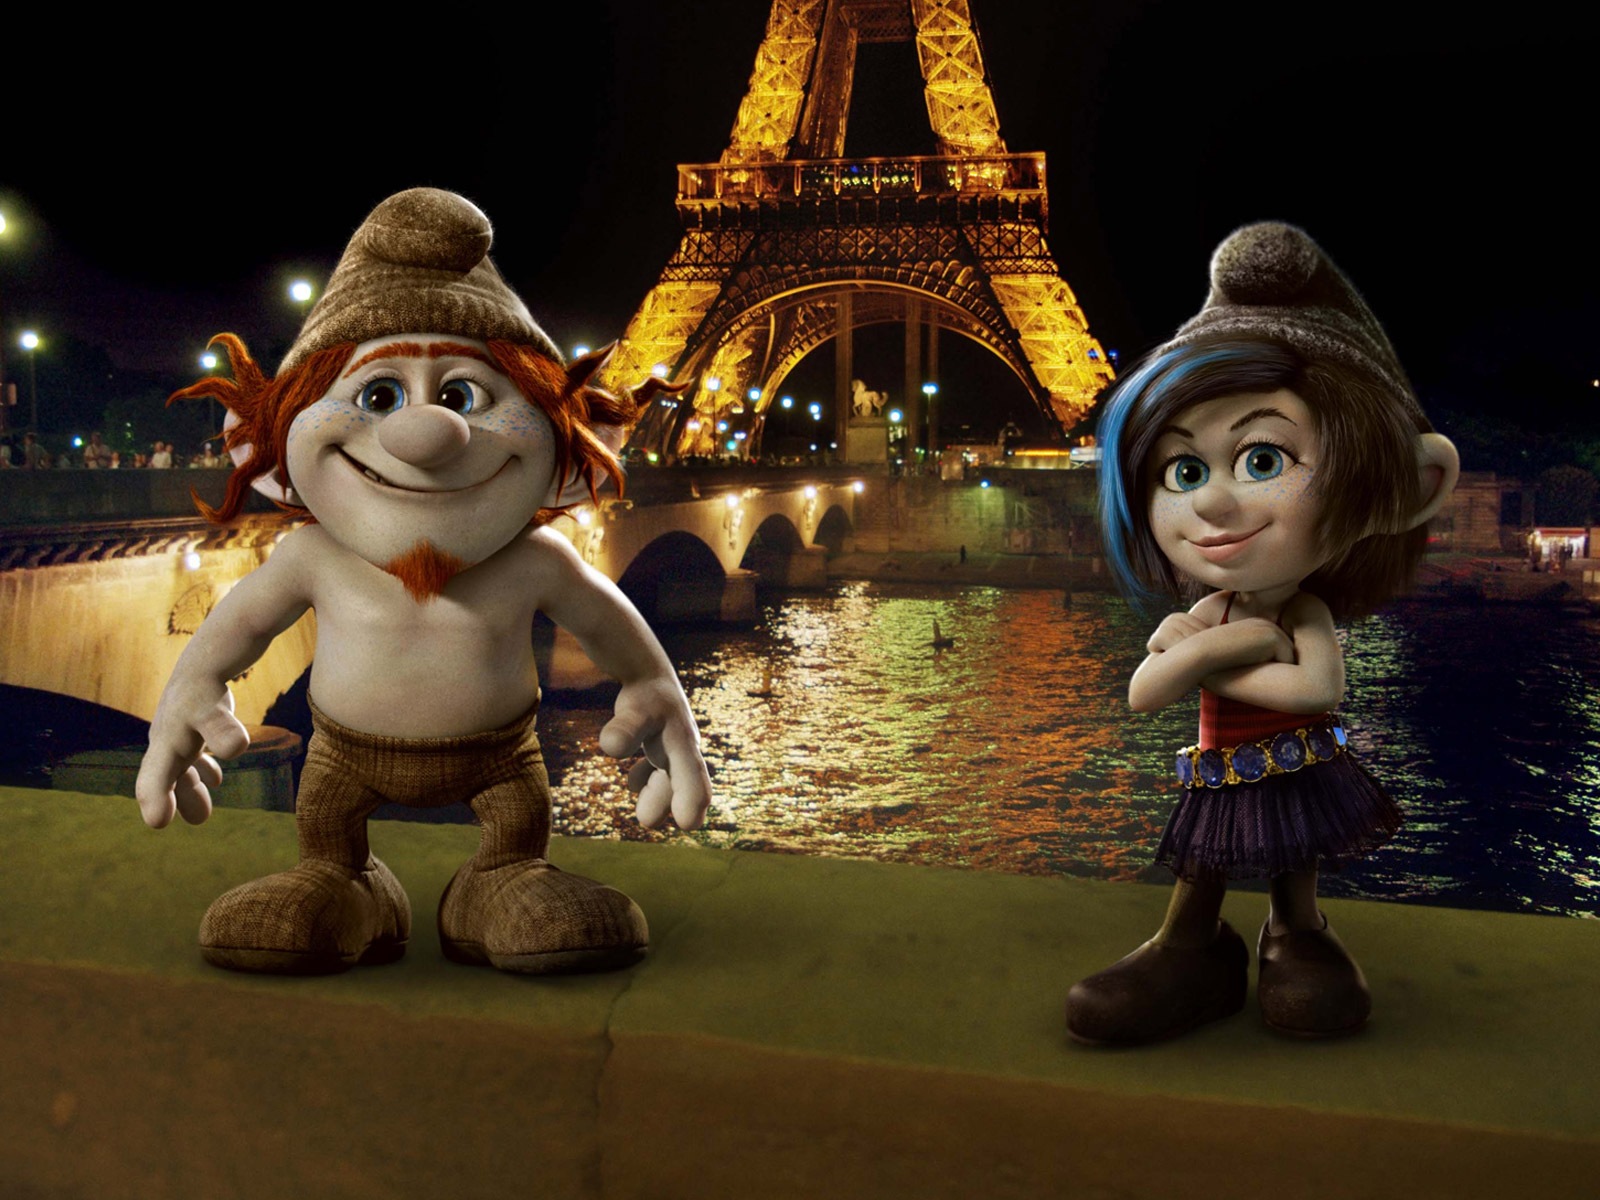 The Smurfs 2 HD movie wallpapers #6 - 1600x1200